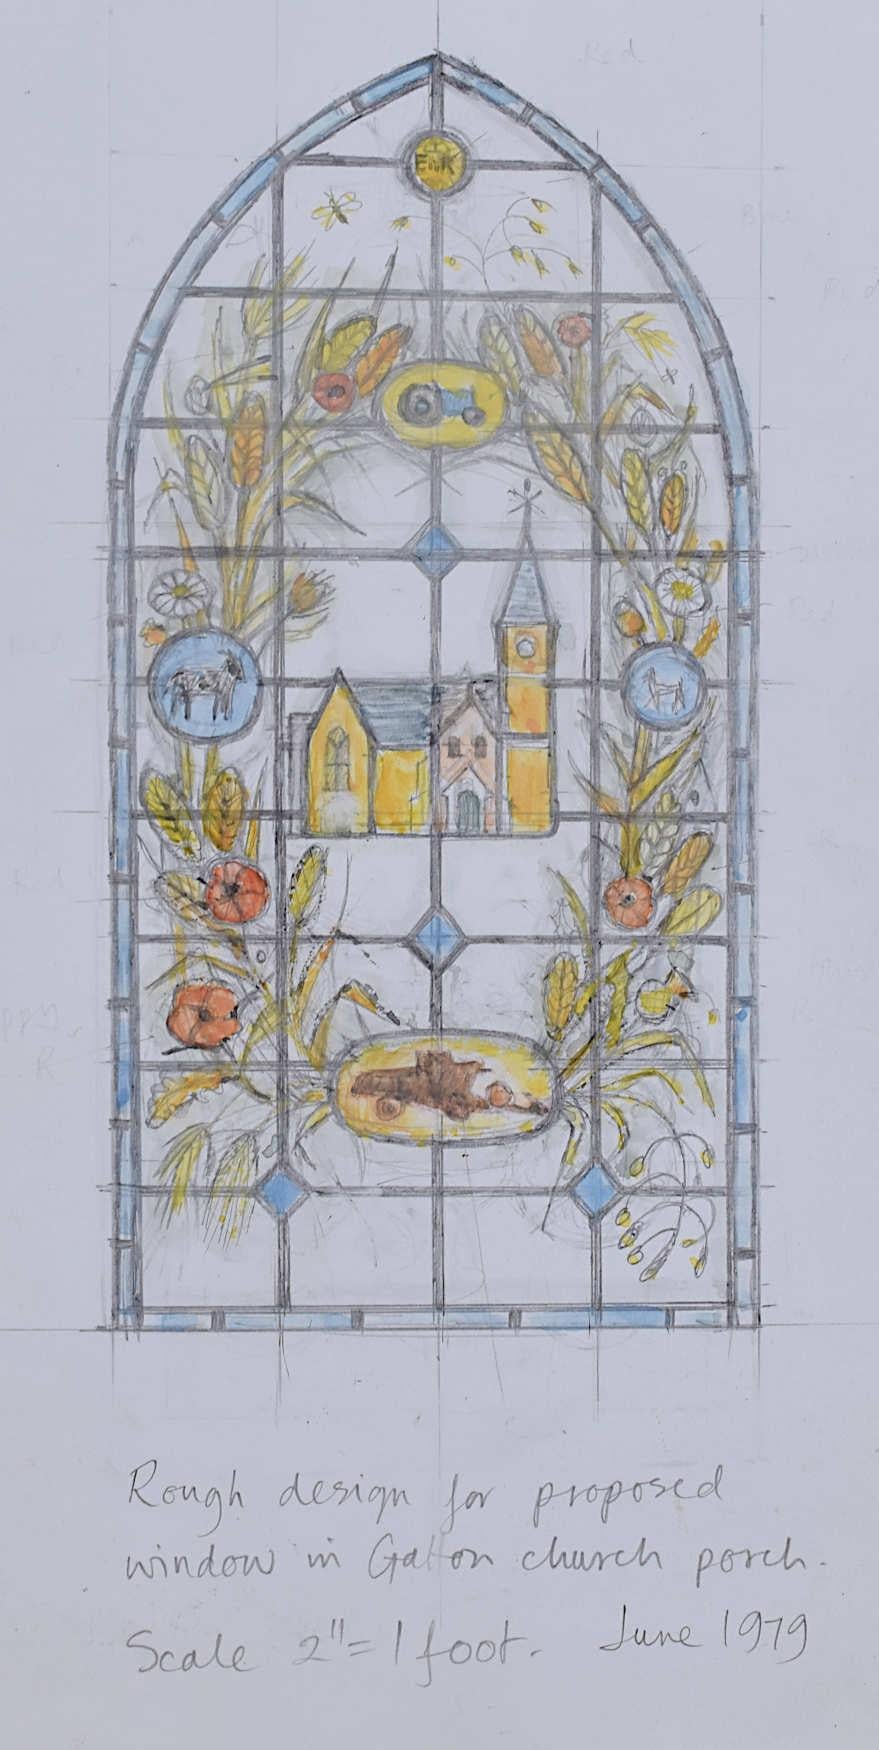 We acquired a series of watercolour stained glass designs from Jane Gray's studio. To find more scroll down to "More from this Seller" and below it click on "See all from this seller." 

Jane Gray (b.1931)
Stained Glass Design
Watercolour and